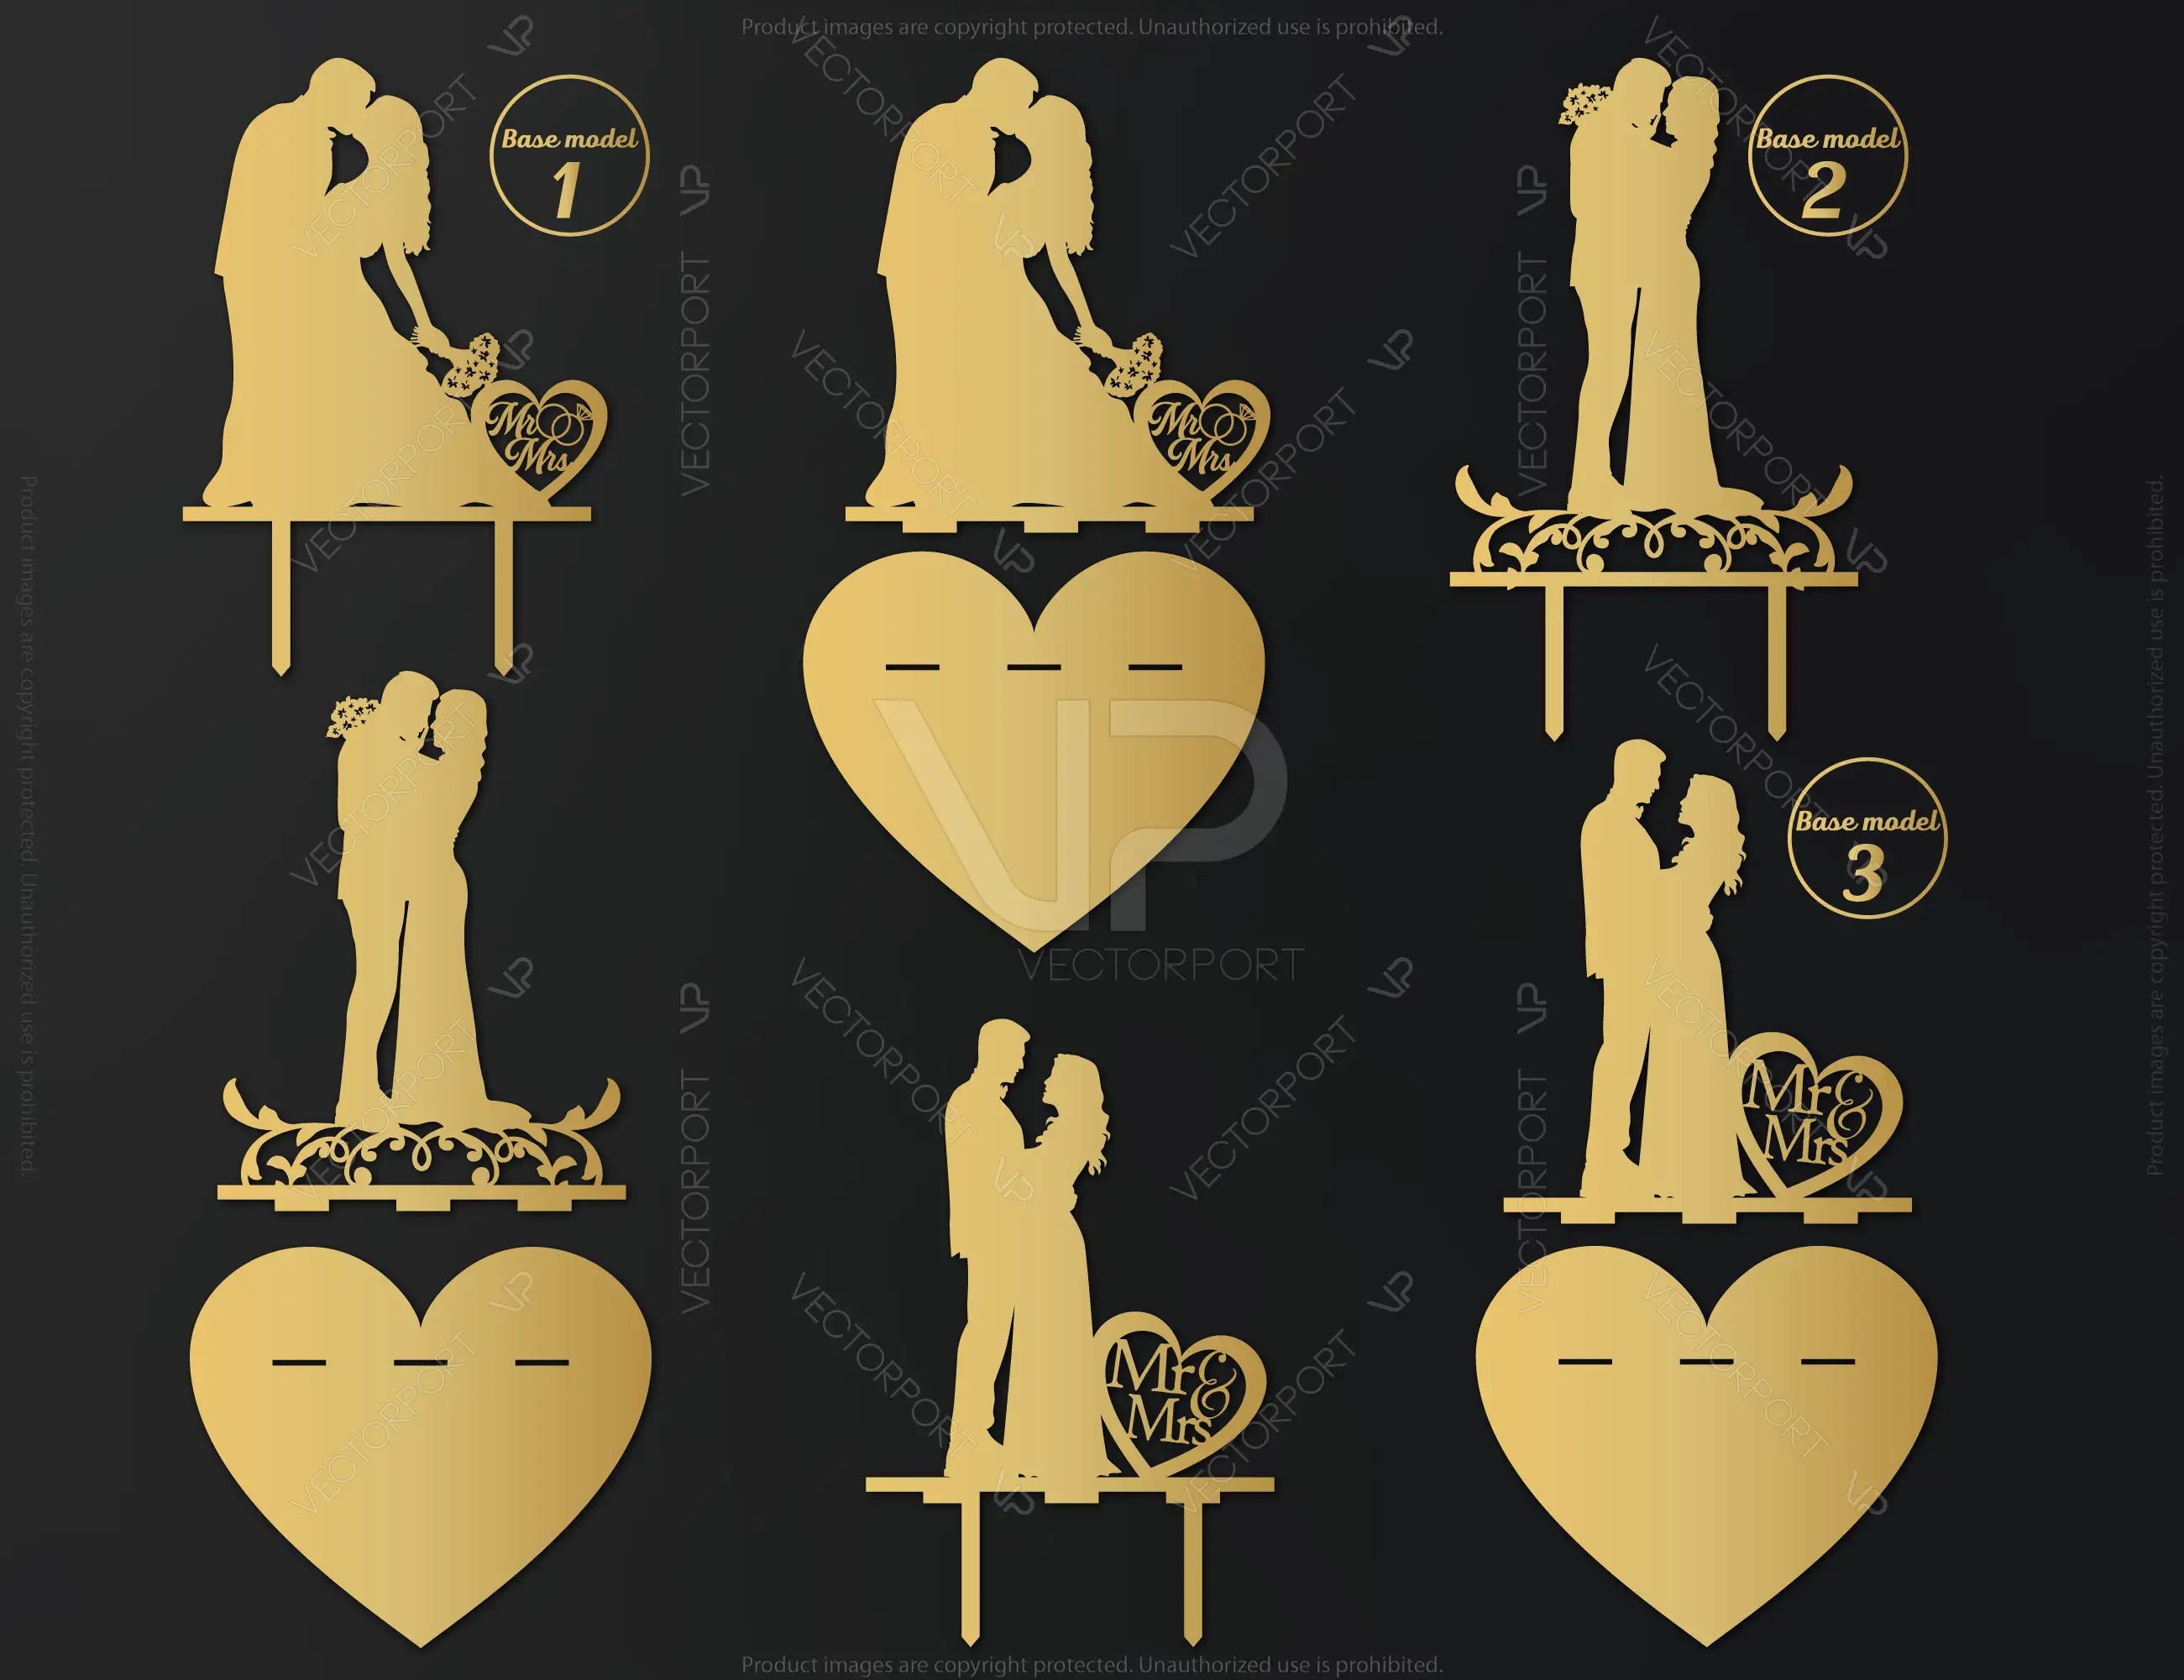 Wedding Cake Topper Bride Groom Mr and Mrs | SVG, DXF, AI |#012|